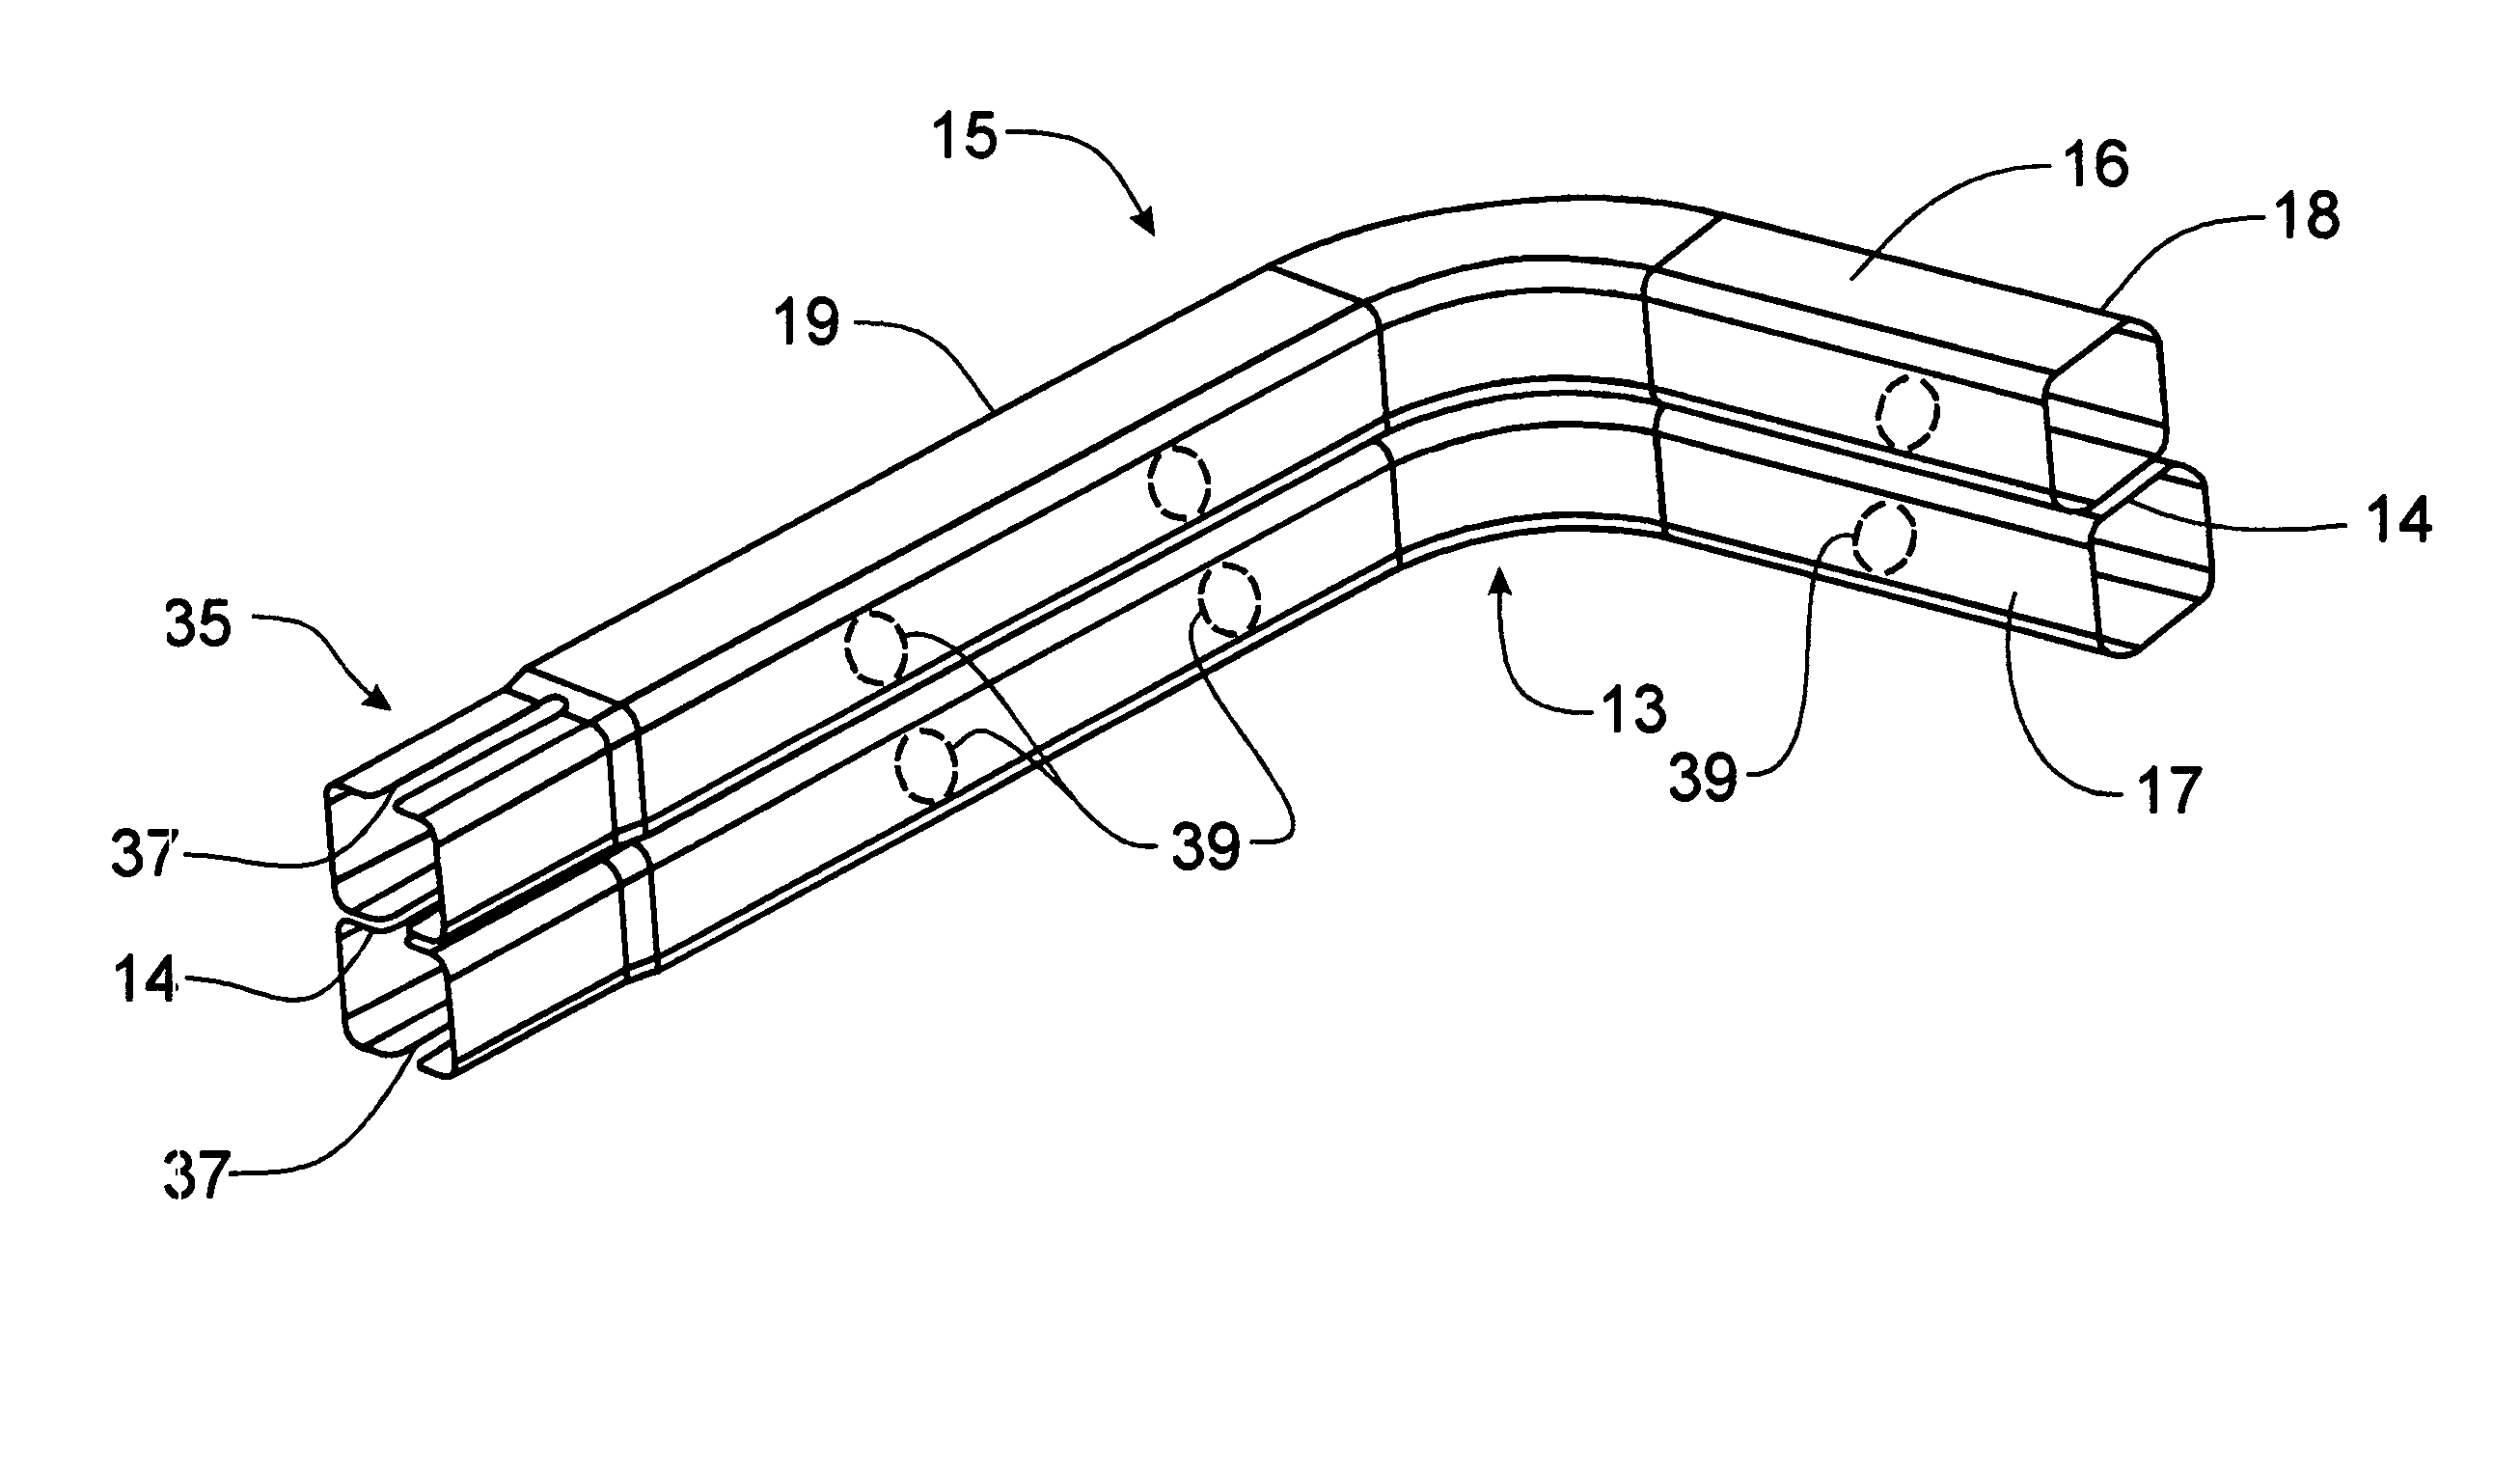 Single component automotive bumper and lower frame rail